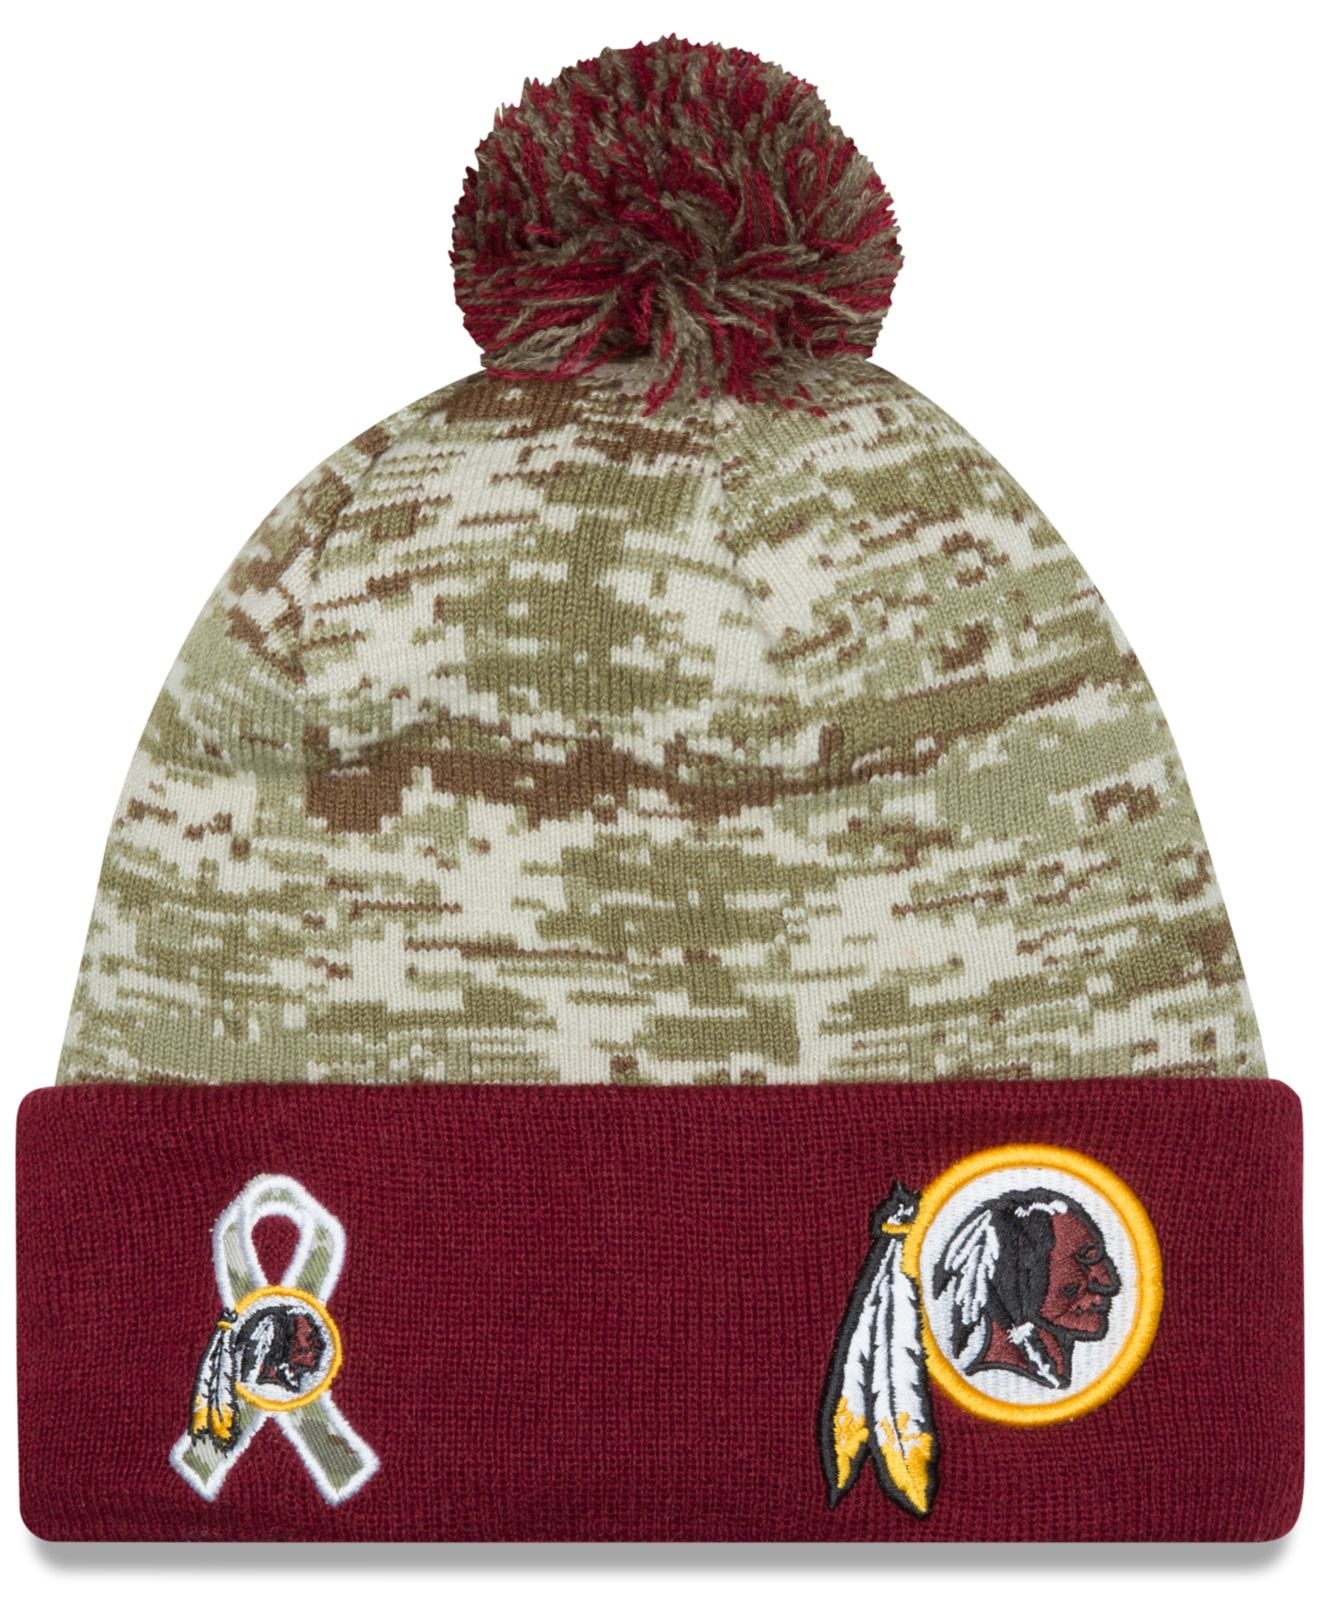 redskins salute to service cap